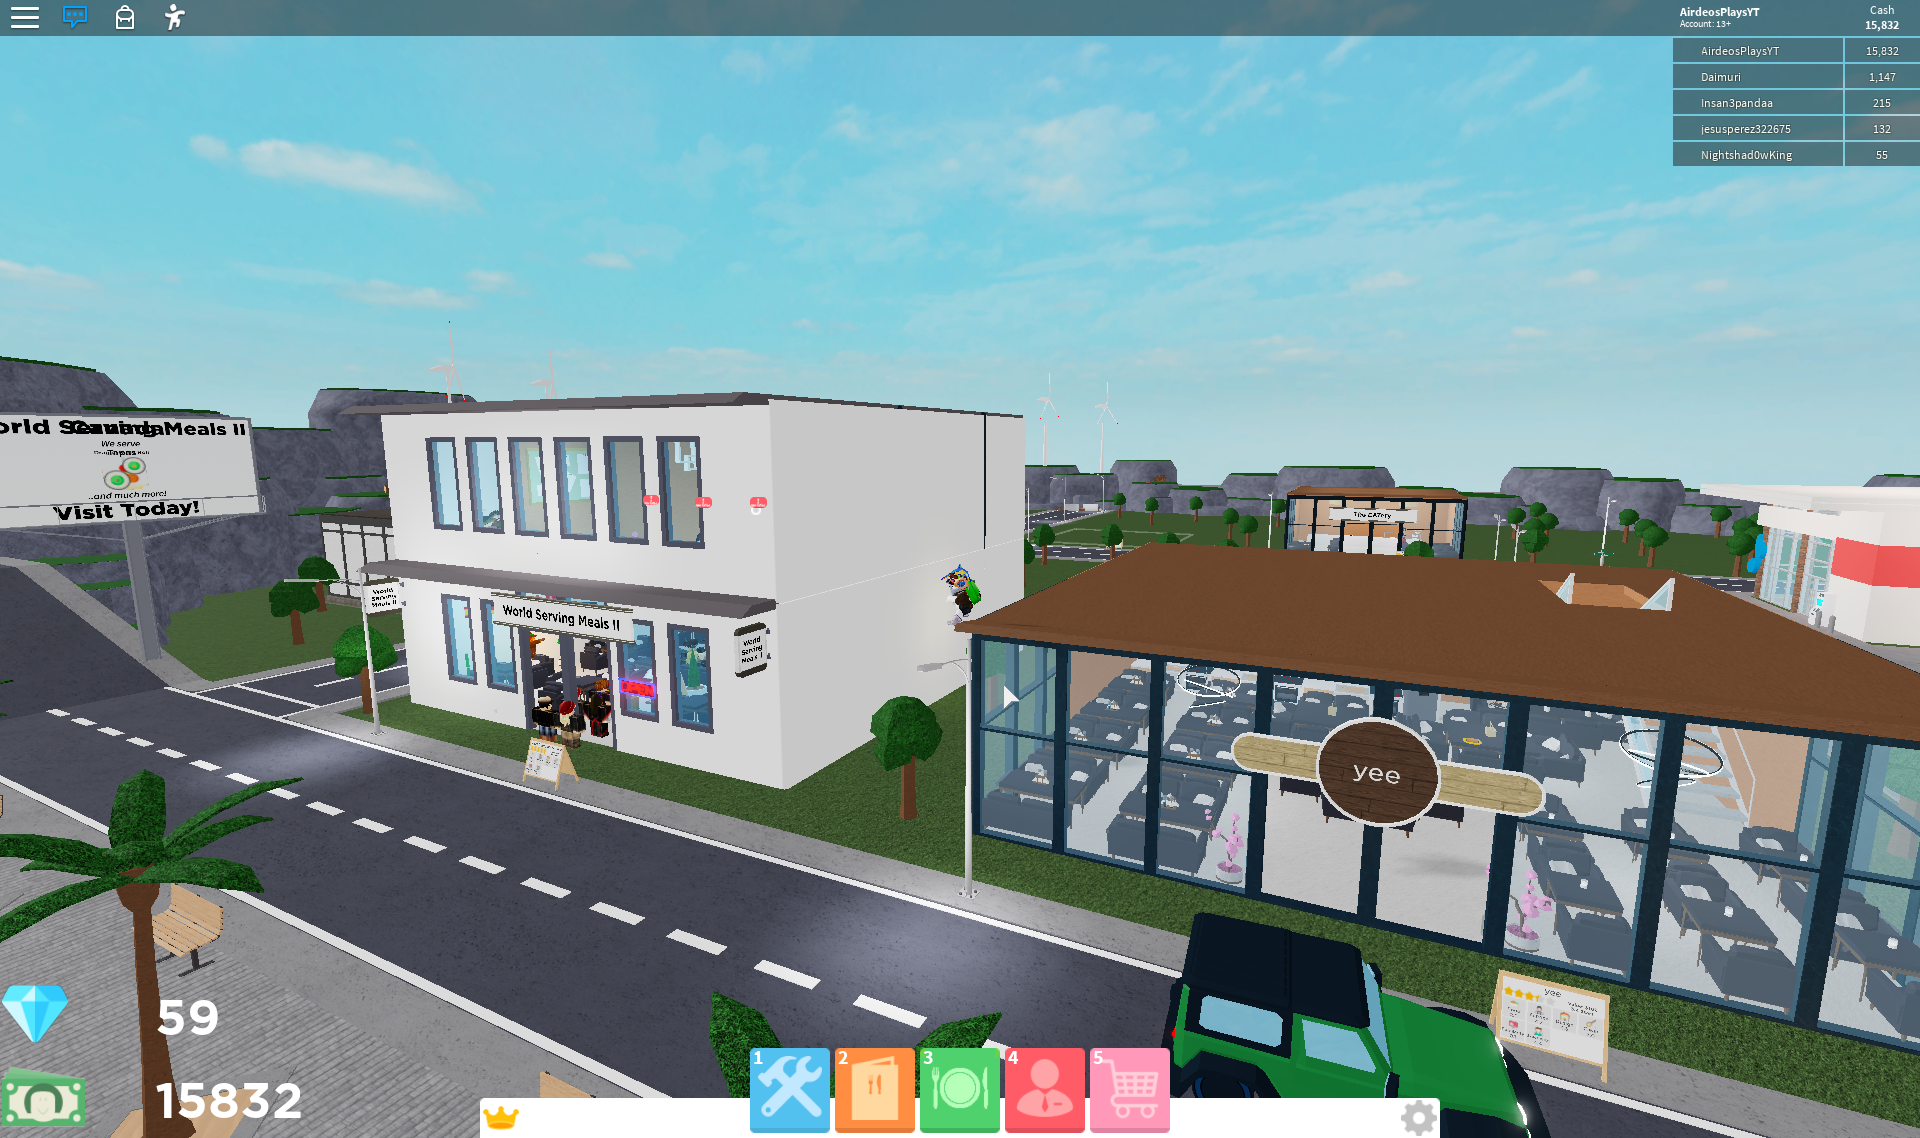 Upgrading Our Restaurant Again Roblox Restaurant Tycoon Roblox Games Downloads Free - restaurant tycoon 2 roblox wiki videos of how to get robux